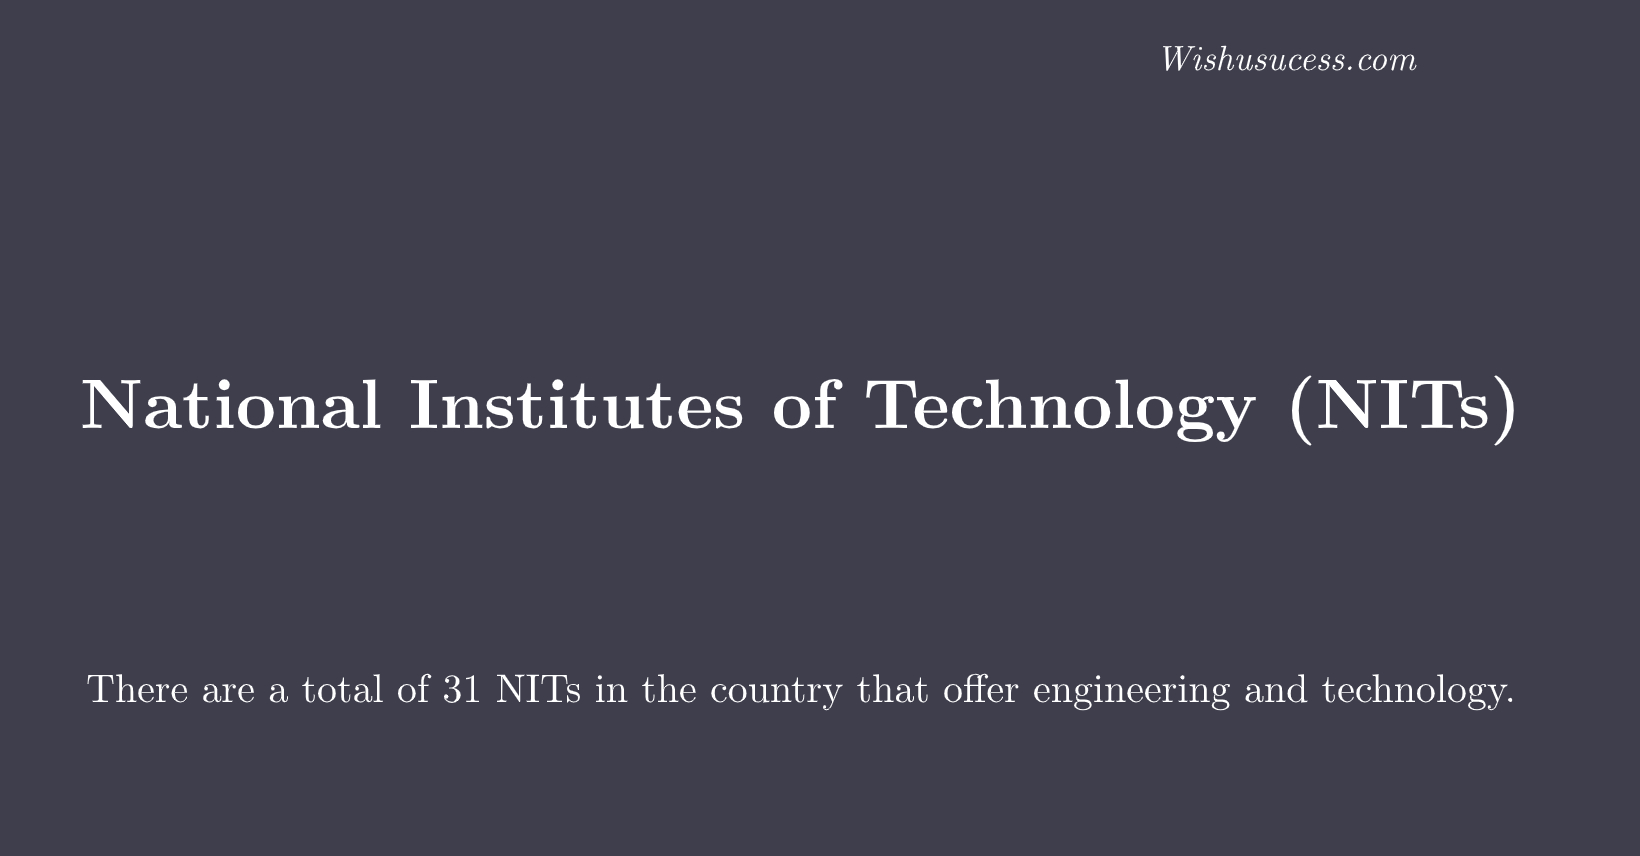 List of NITs in India in 2020